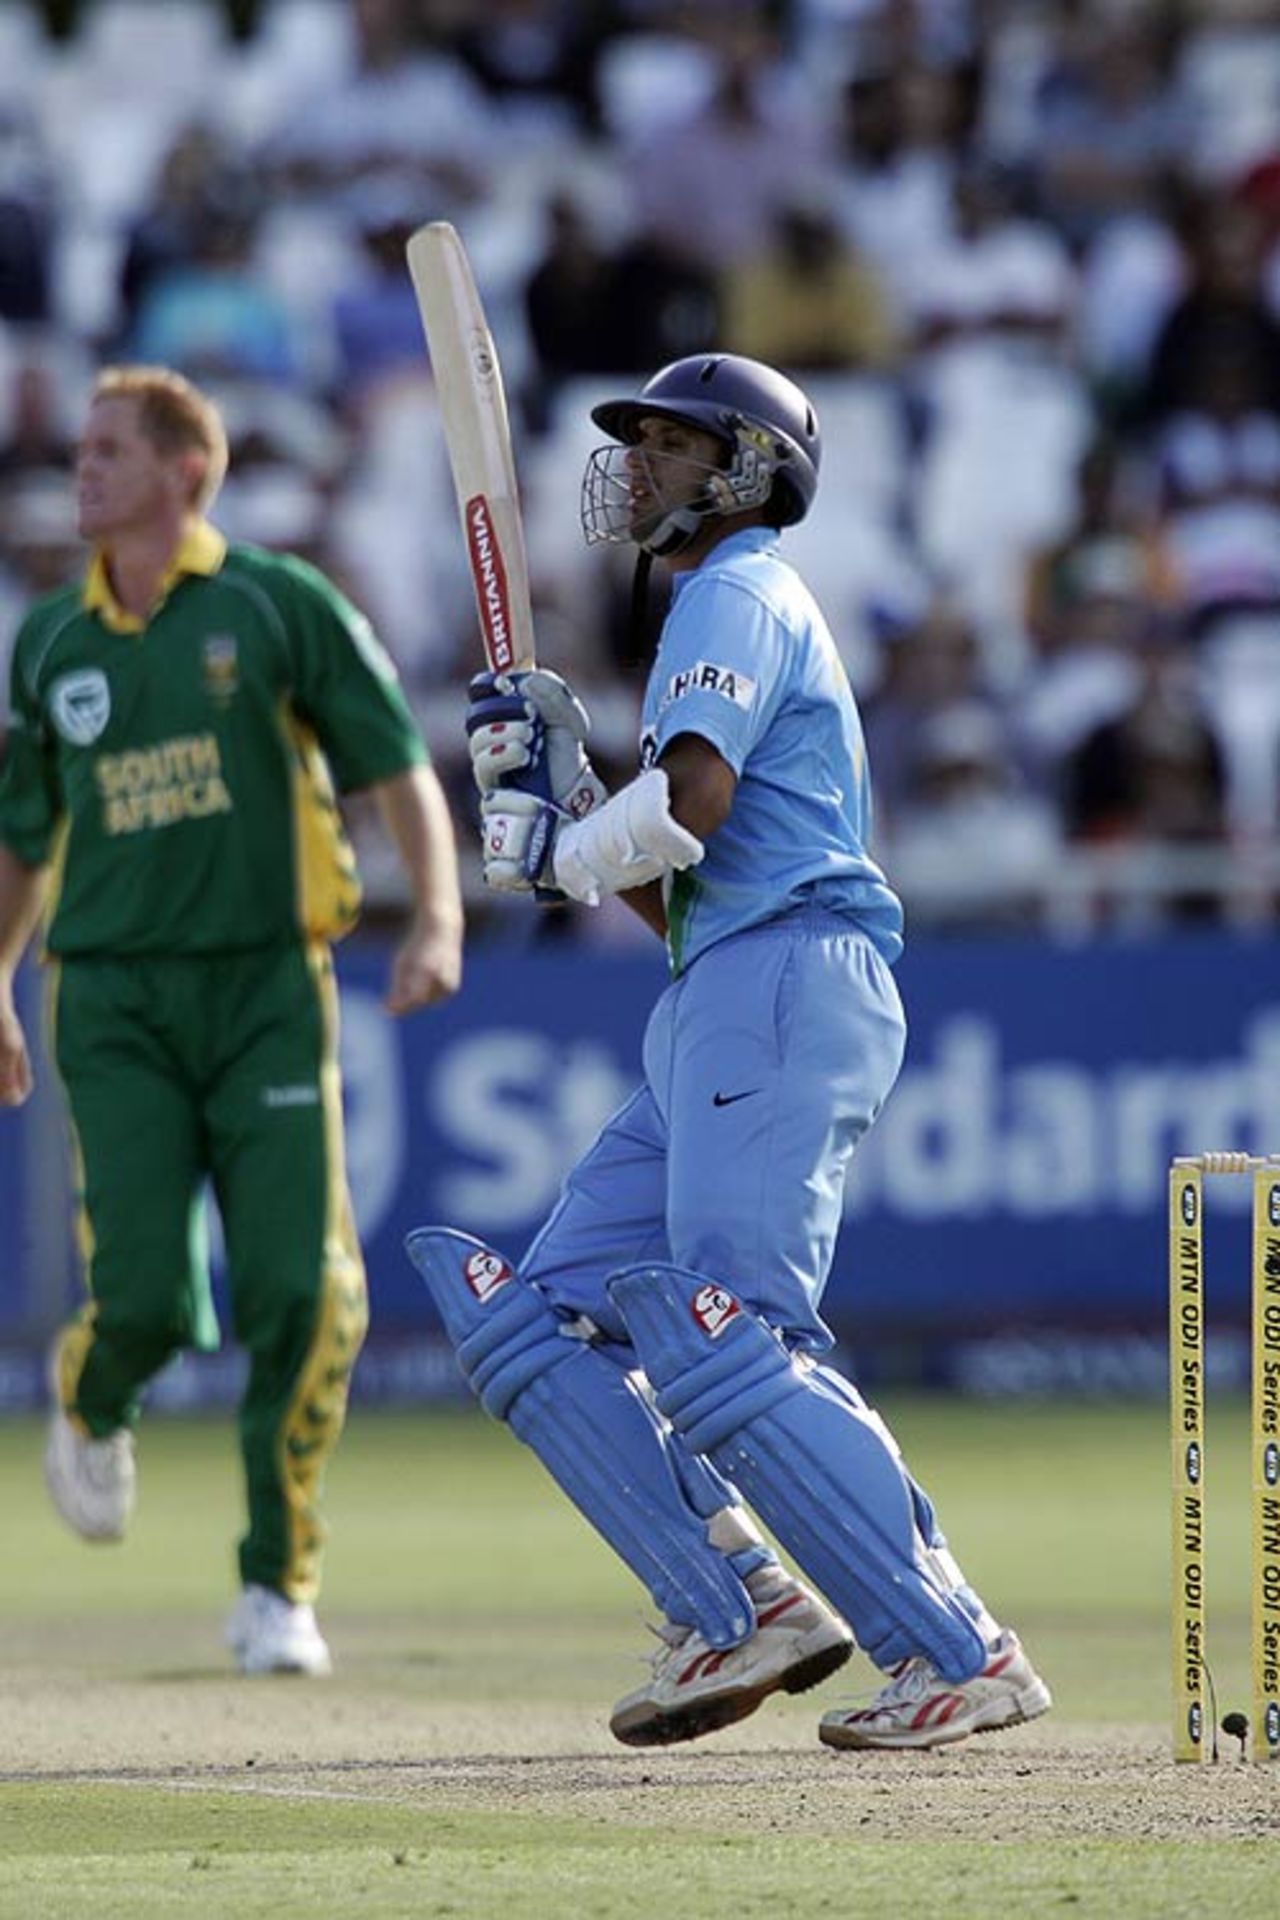 Rahul Dravid flicks on his way to a battling fifty, South Africa v India, 3rd ODI, Cape Town, November 26, 2006